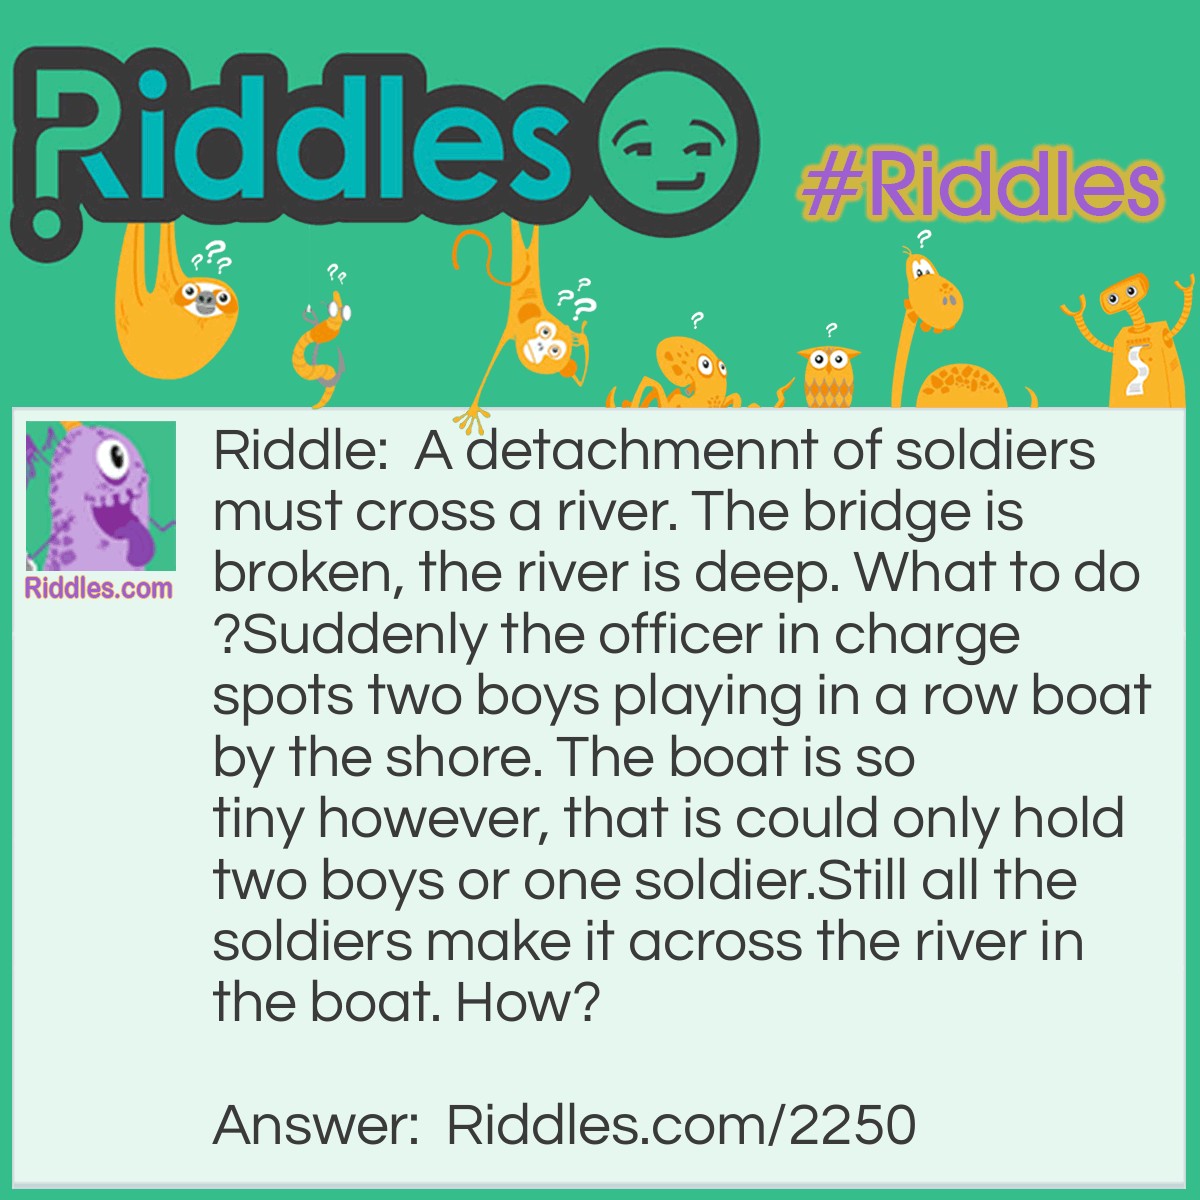 Riddle: A detachment of soldiers must cross a river. The bridge is broken, the river is deep. What to do?
Suddenly the officer in charge spots two boys playing in a row boat by the shore. 
The boat is so tiny however, that is could only hold two boys or one soldier.
Still all the soldiers make it across the river in the boat. How? Answer: First the boys cross the river and 1 boy comes back and gets a soldier and keeps going back until all the soldiers have made it across safetly.